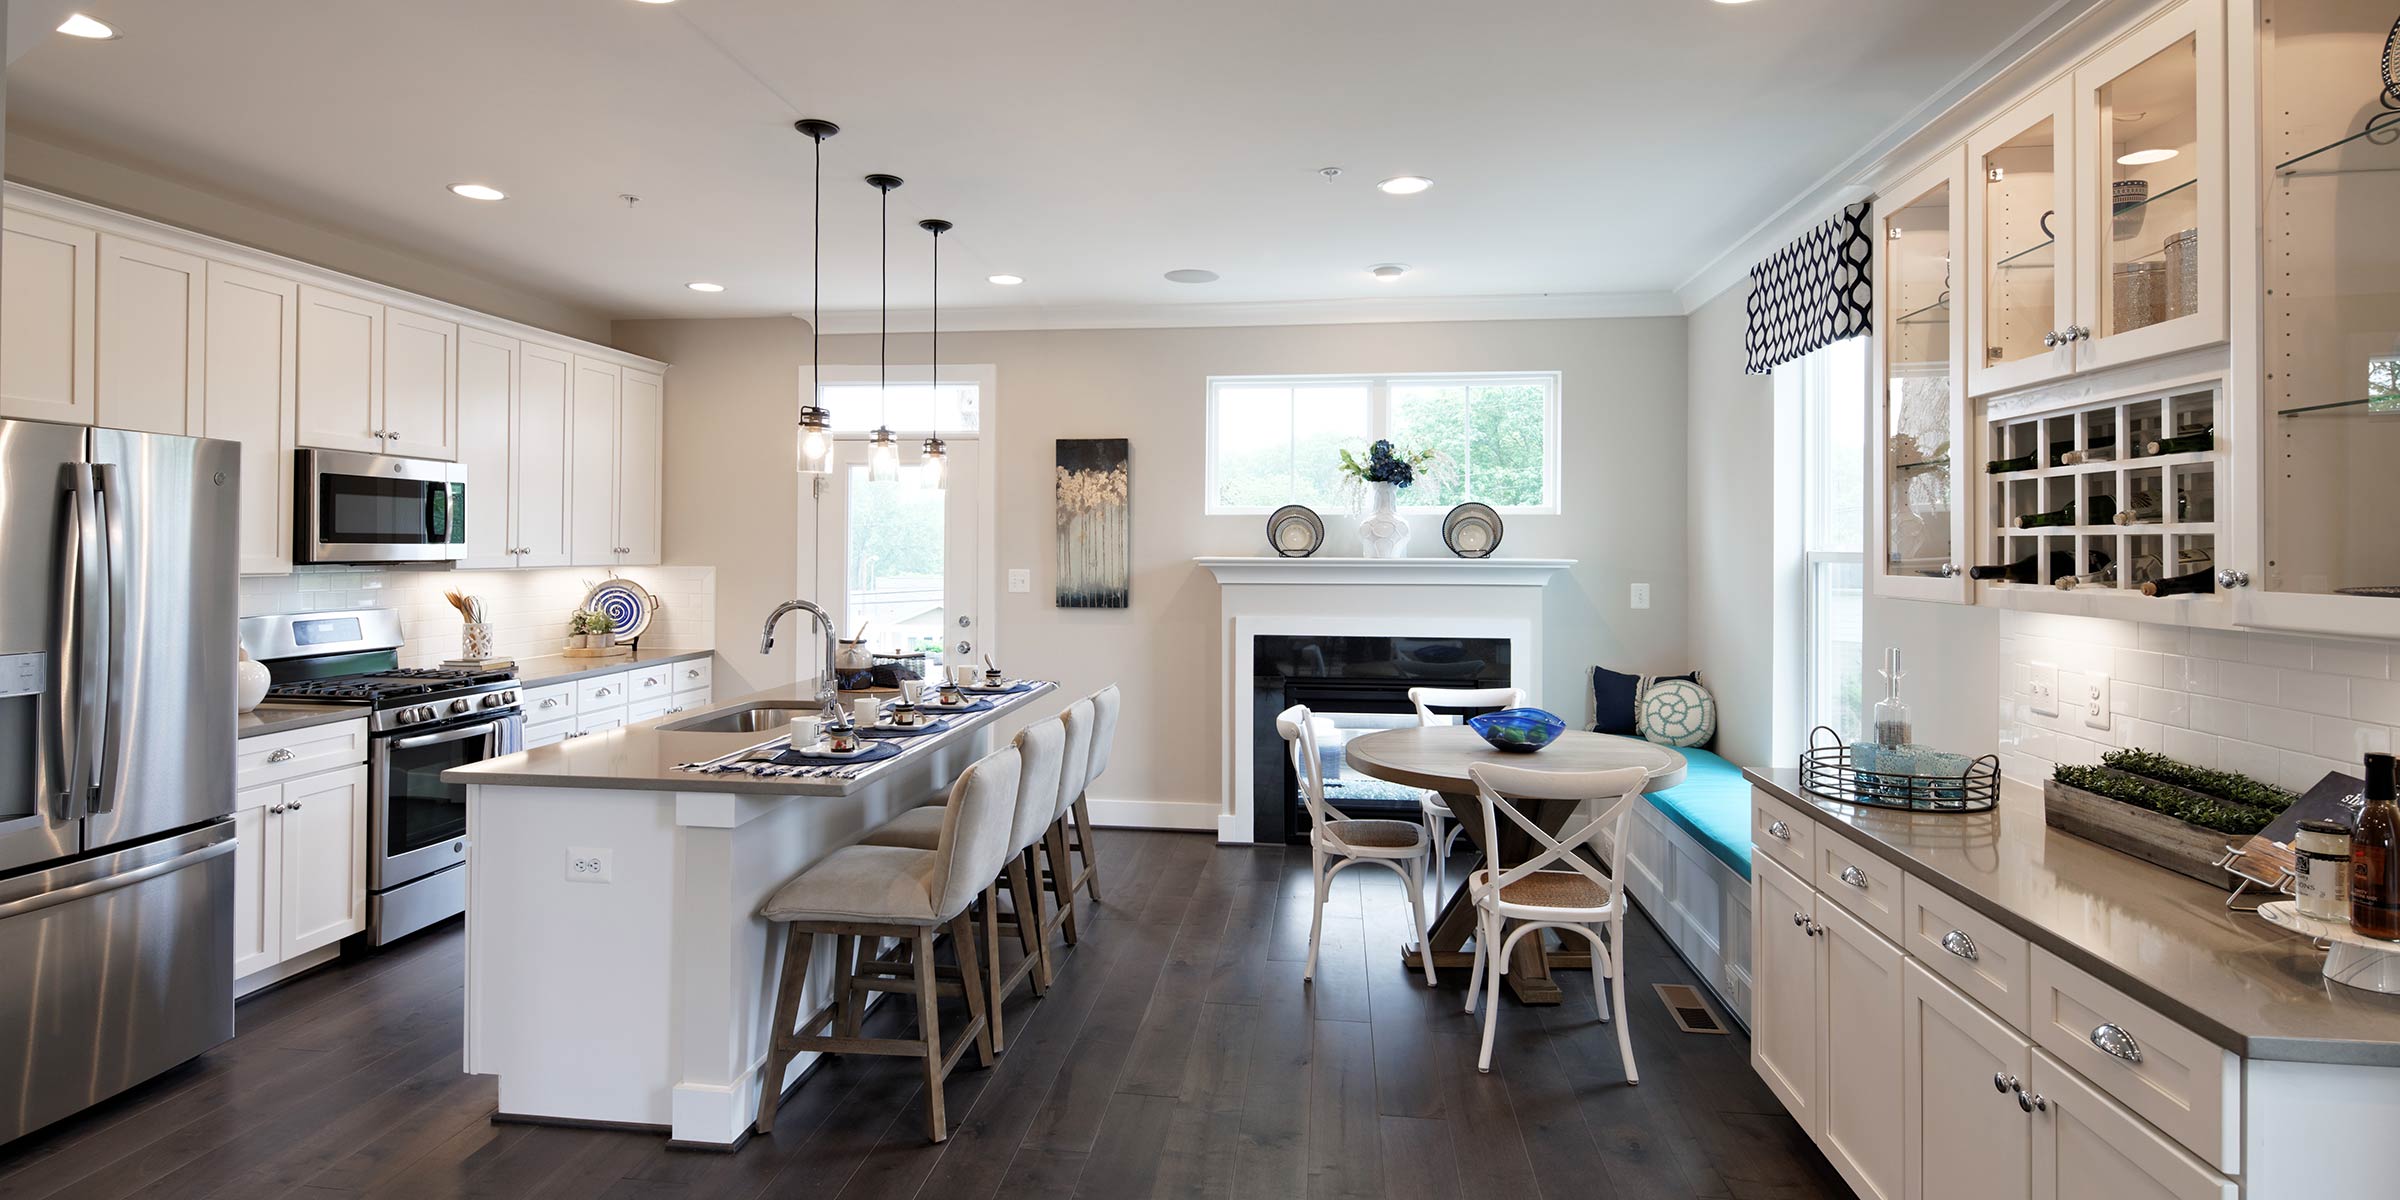 Kitchen & Dining Space, Townhomes in Annapolis MD